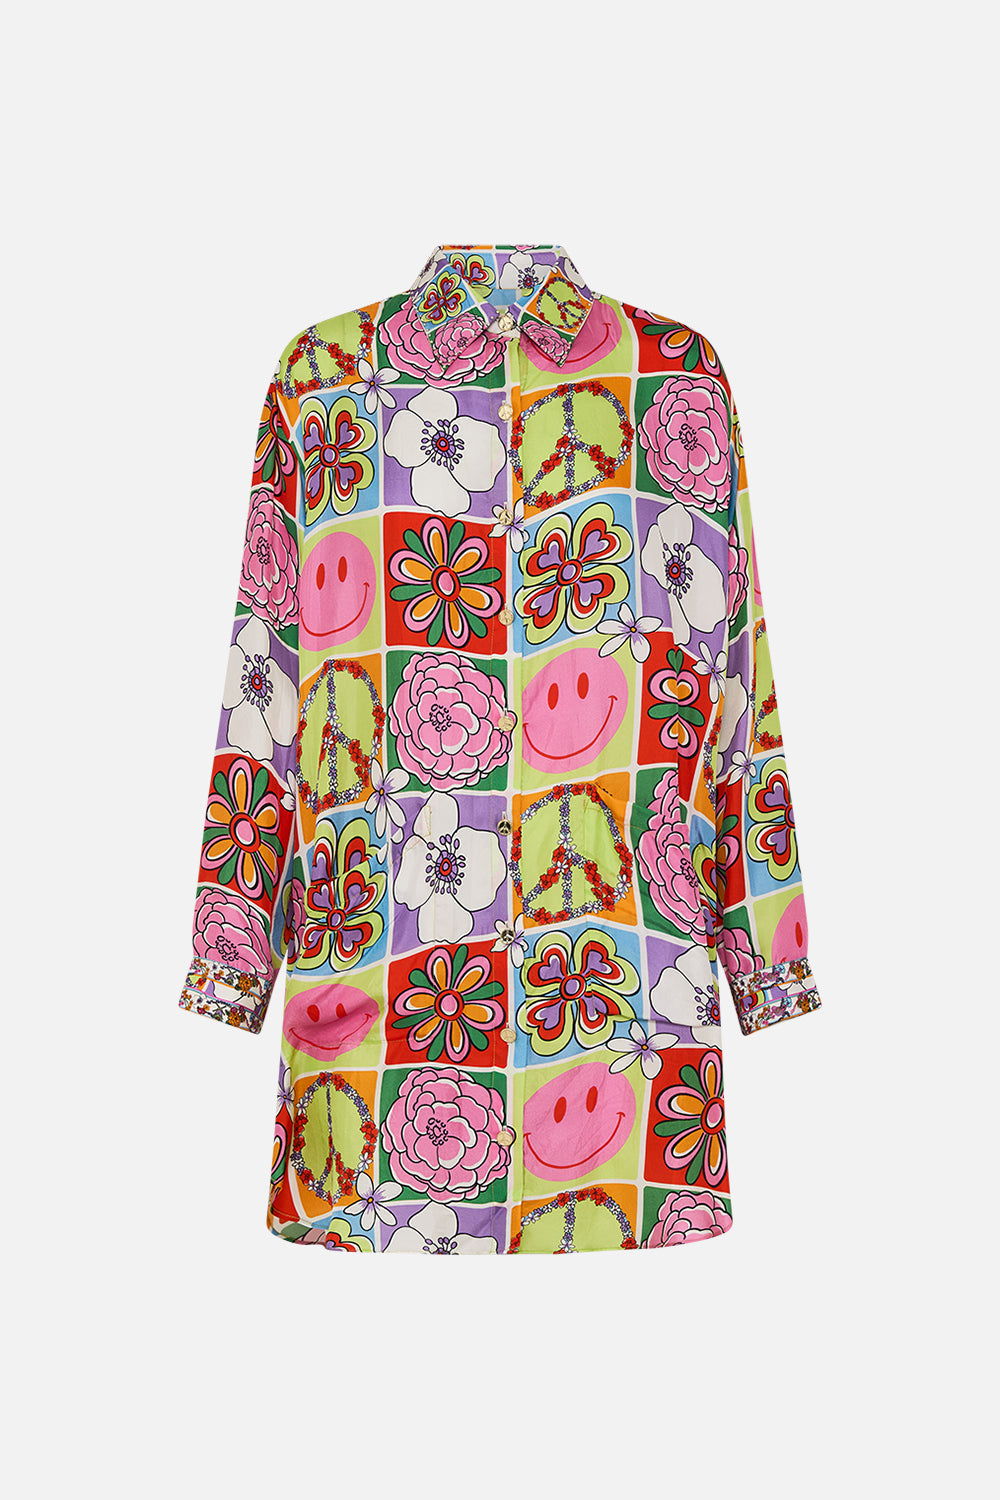 CAMILLA floral Shirt Tunic with Pockets in Cosmic Prairie